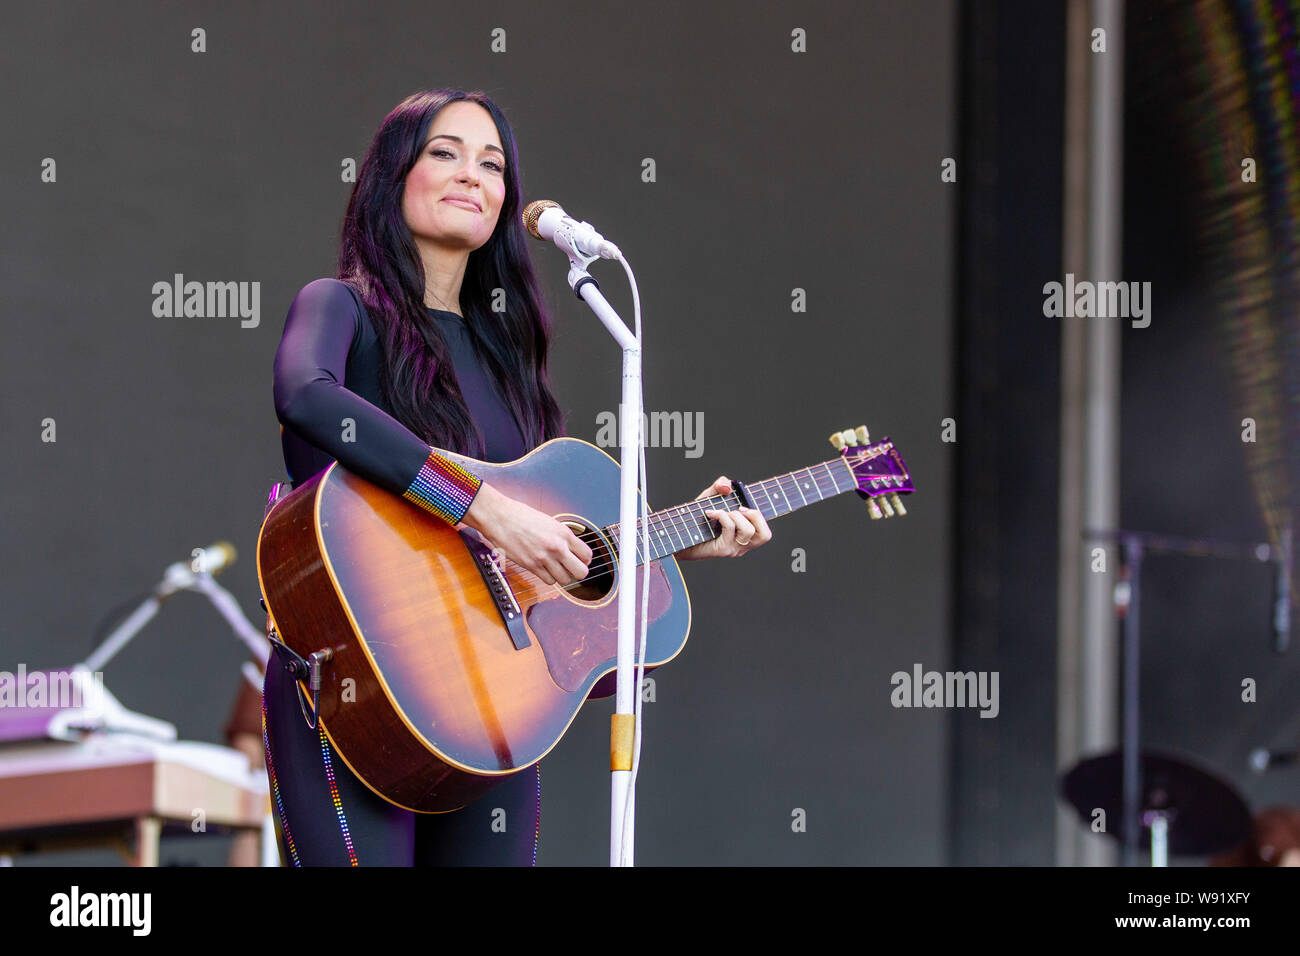 August 11, 2019, San Francisco, California, U.S: KACEY MUSGRAVES during Outside Lands Music Festival at Golden Gate Park in San Francisco, California (Credit Image: © Daniel DeSlover/ZUMA Wire) Stock Photo